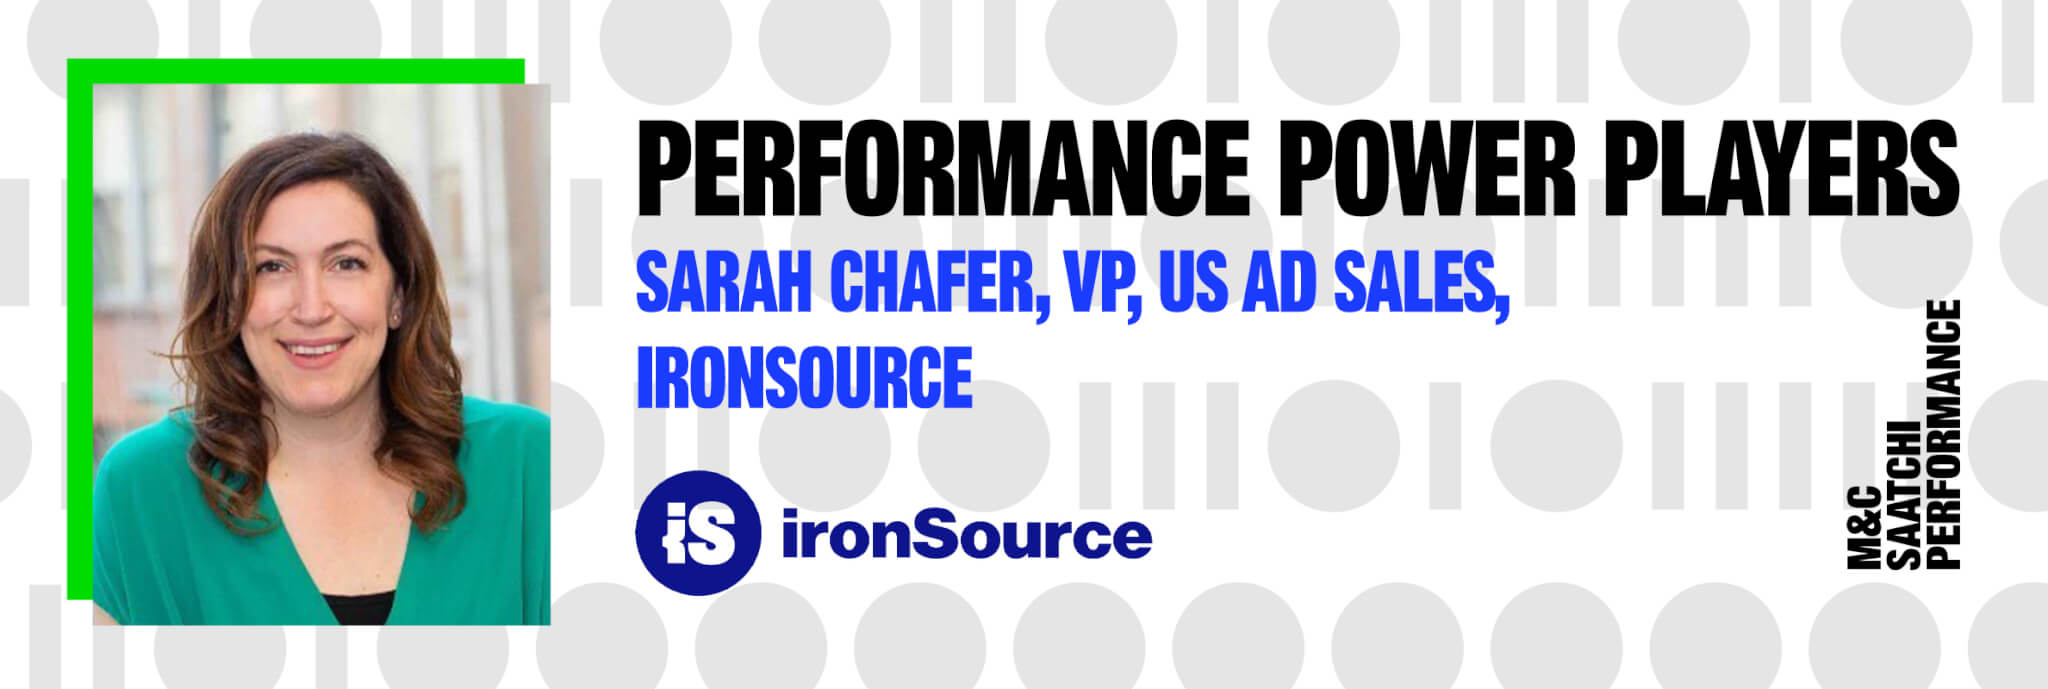 We talk to Sarah Chafer from ironSource about User Acquisition on Mobile Devices